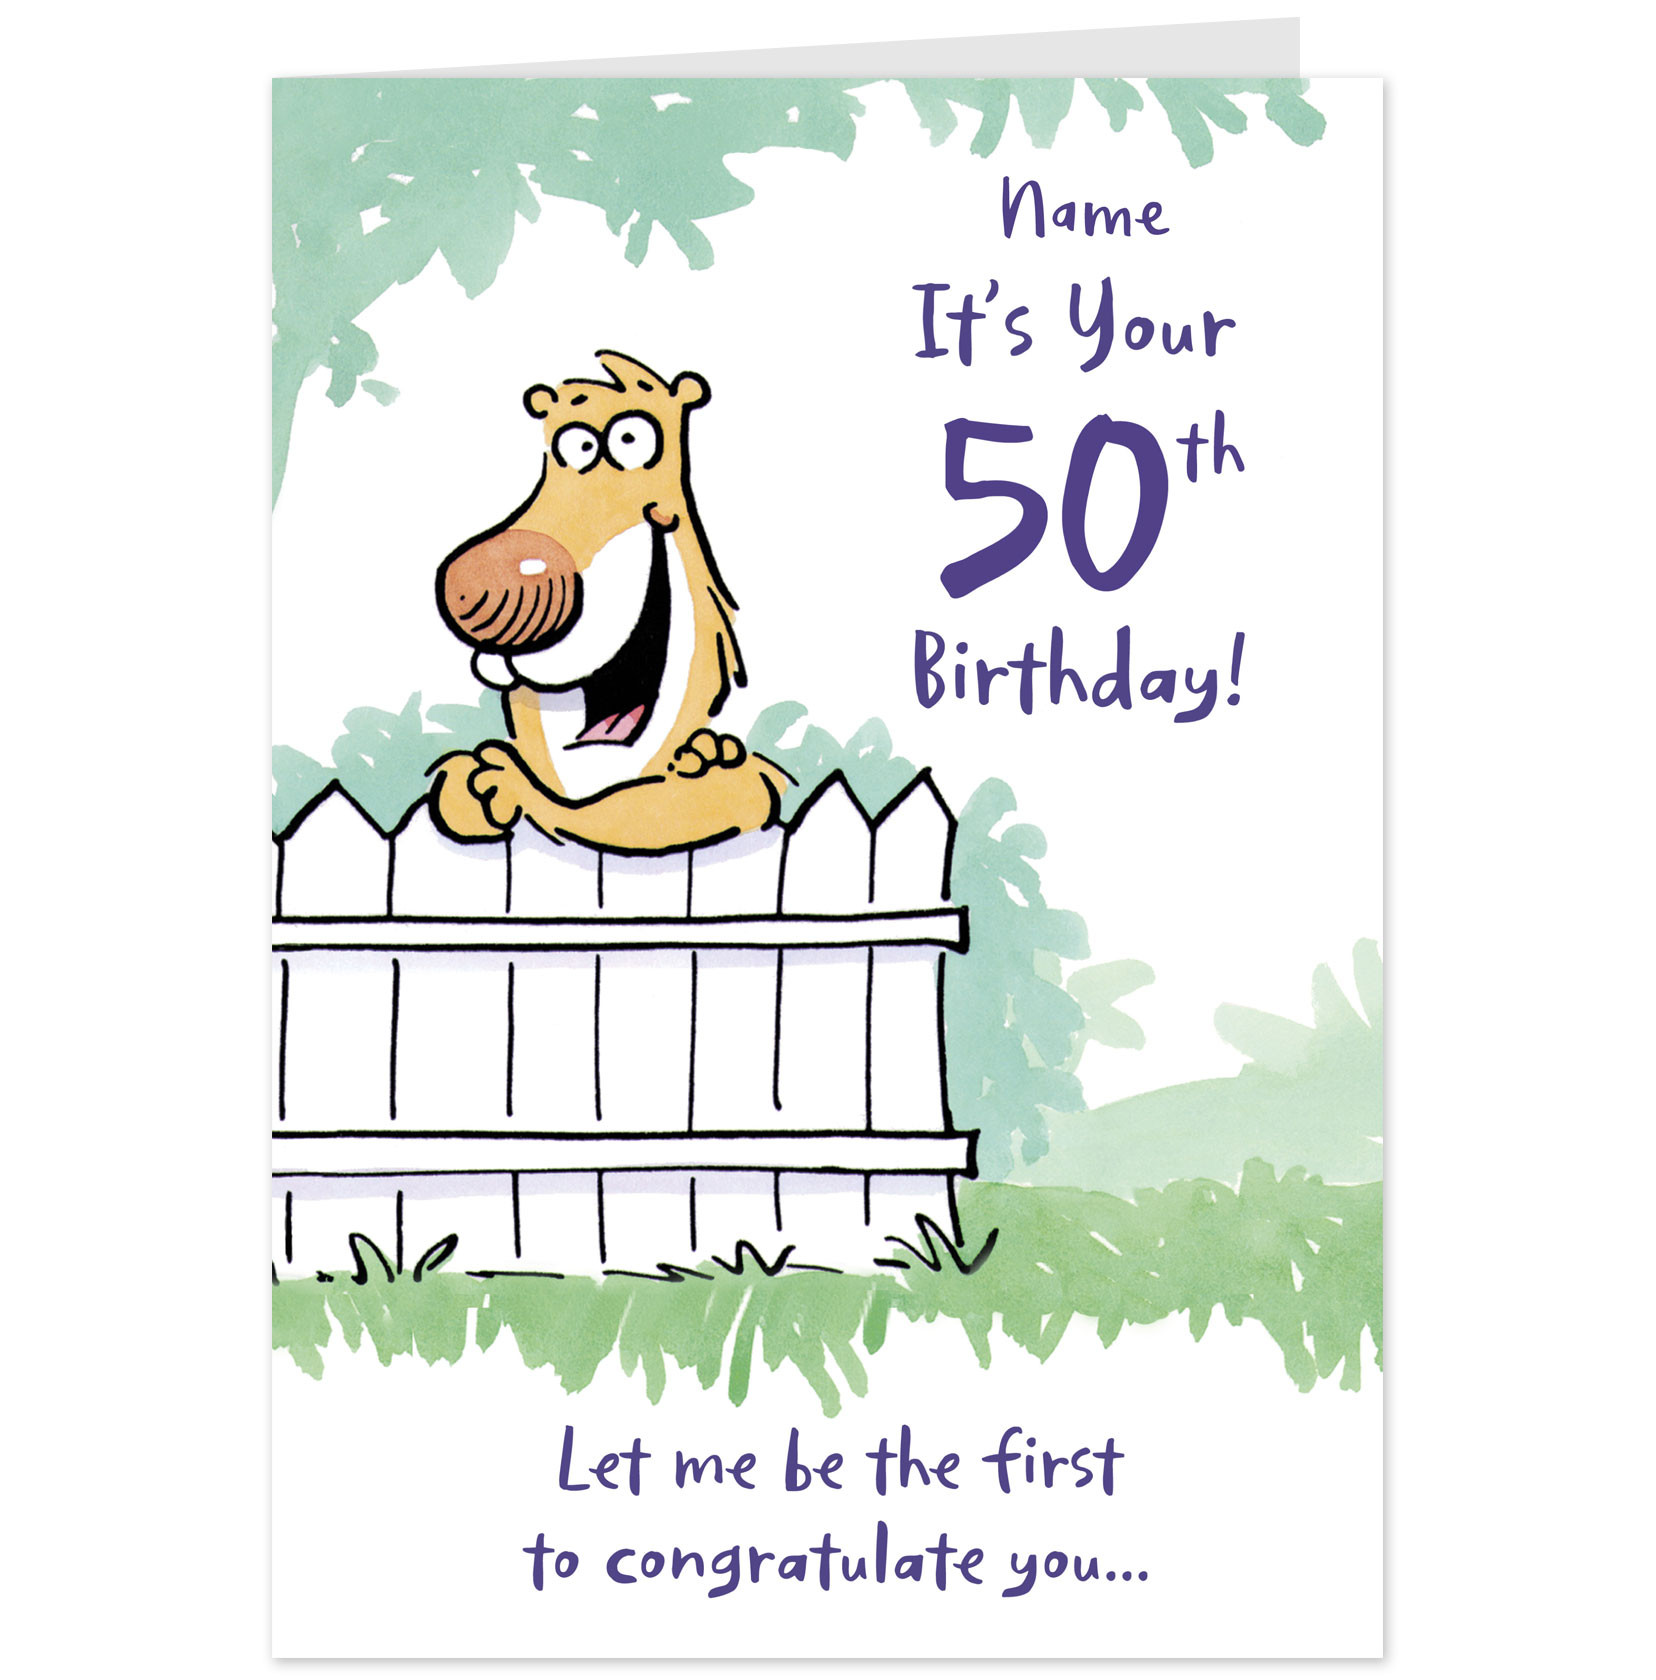 50th Birthday Quotes Funny
 50th Birthday Quotes For Friend QuotesGram